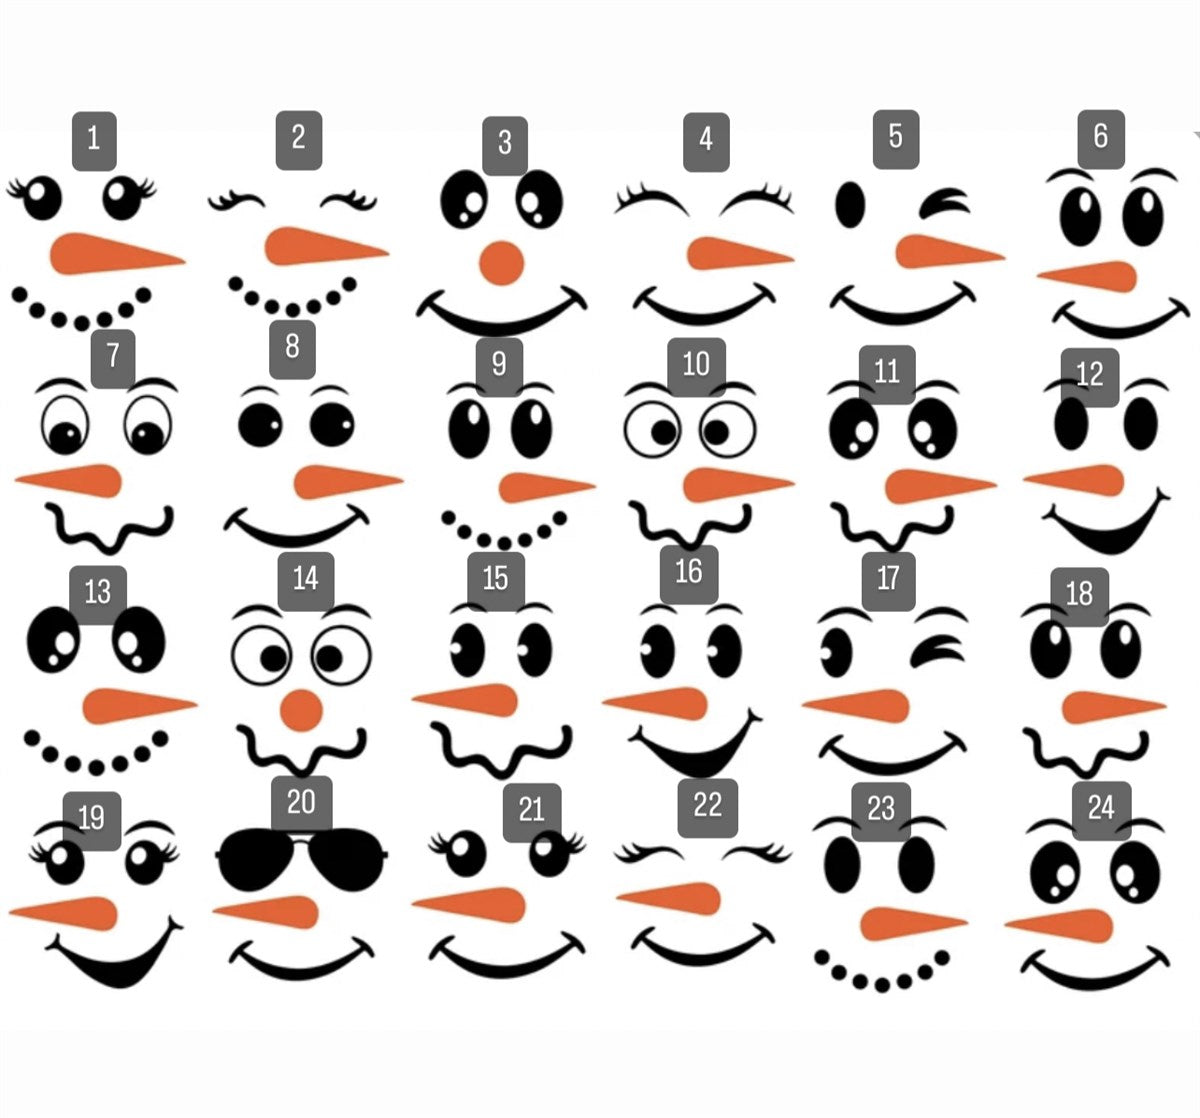 Adorable Snowman Face Tees | Youth & Adult